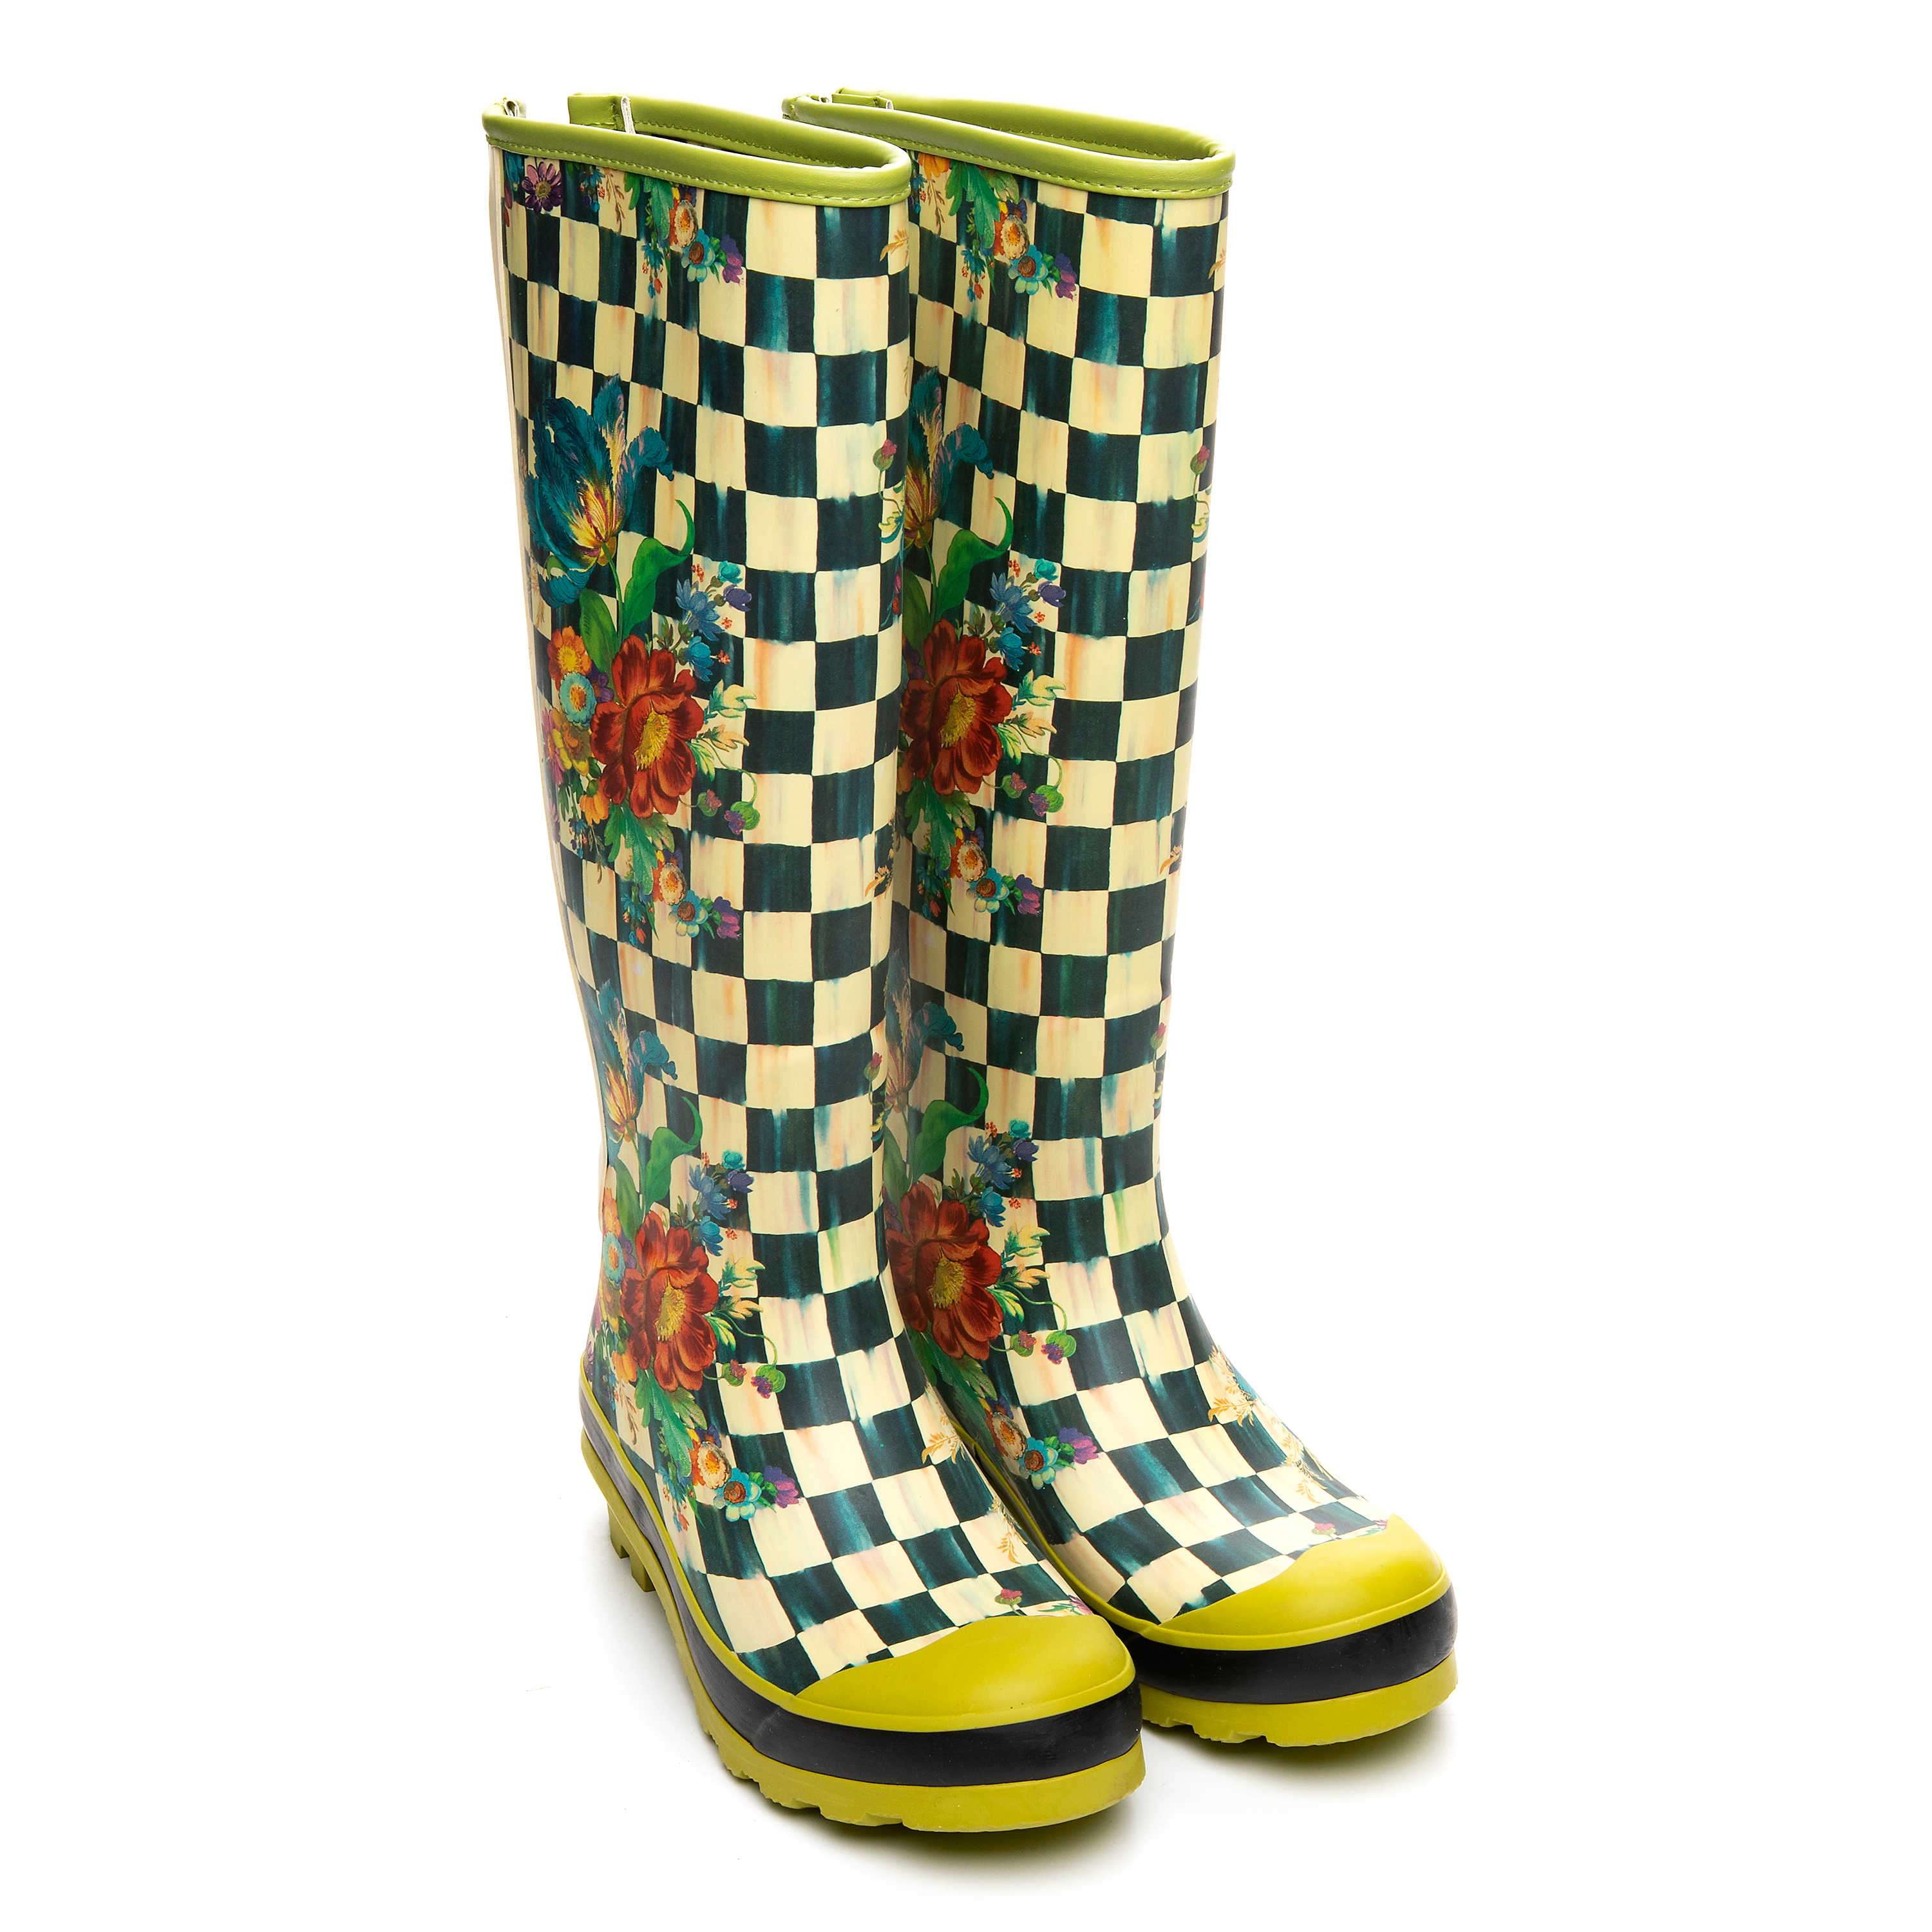 Courtly Check Rain Boots - Tall - Size 8 mackenzie-childs Panama 0